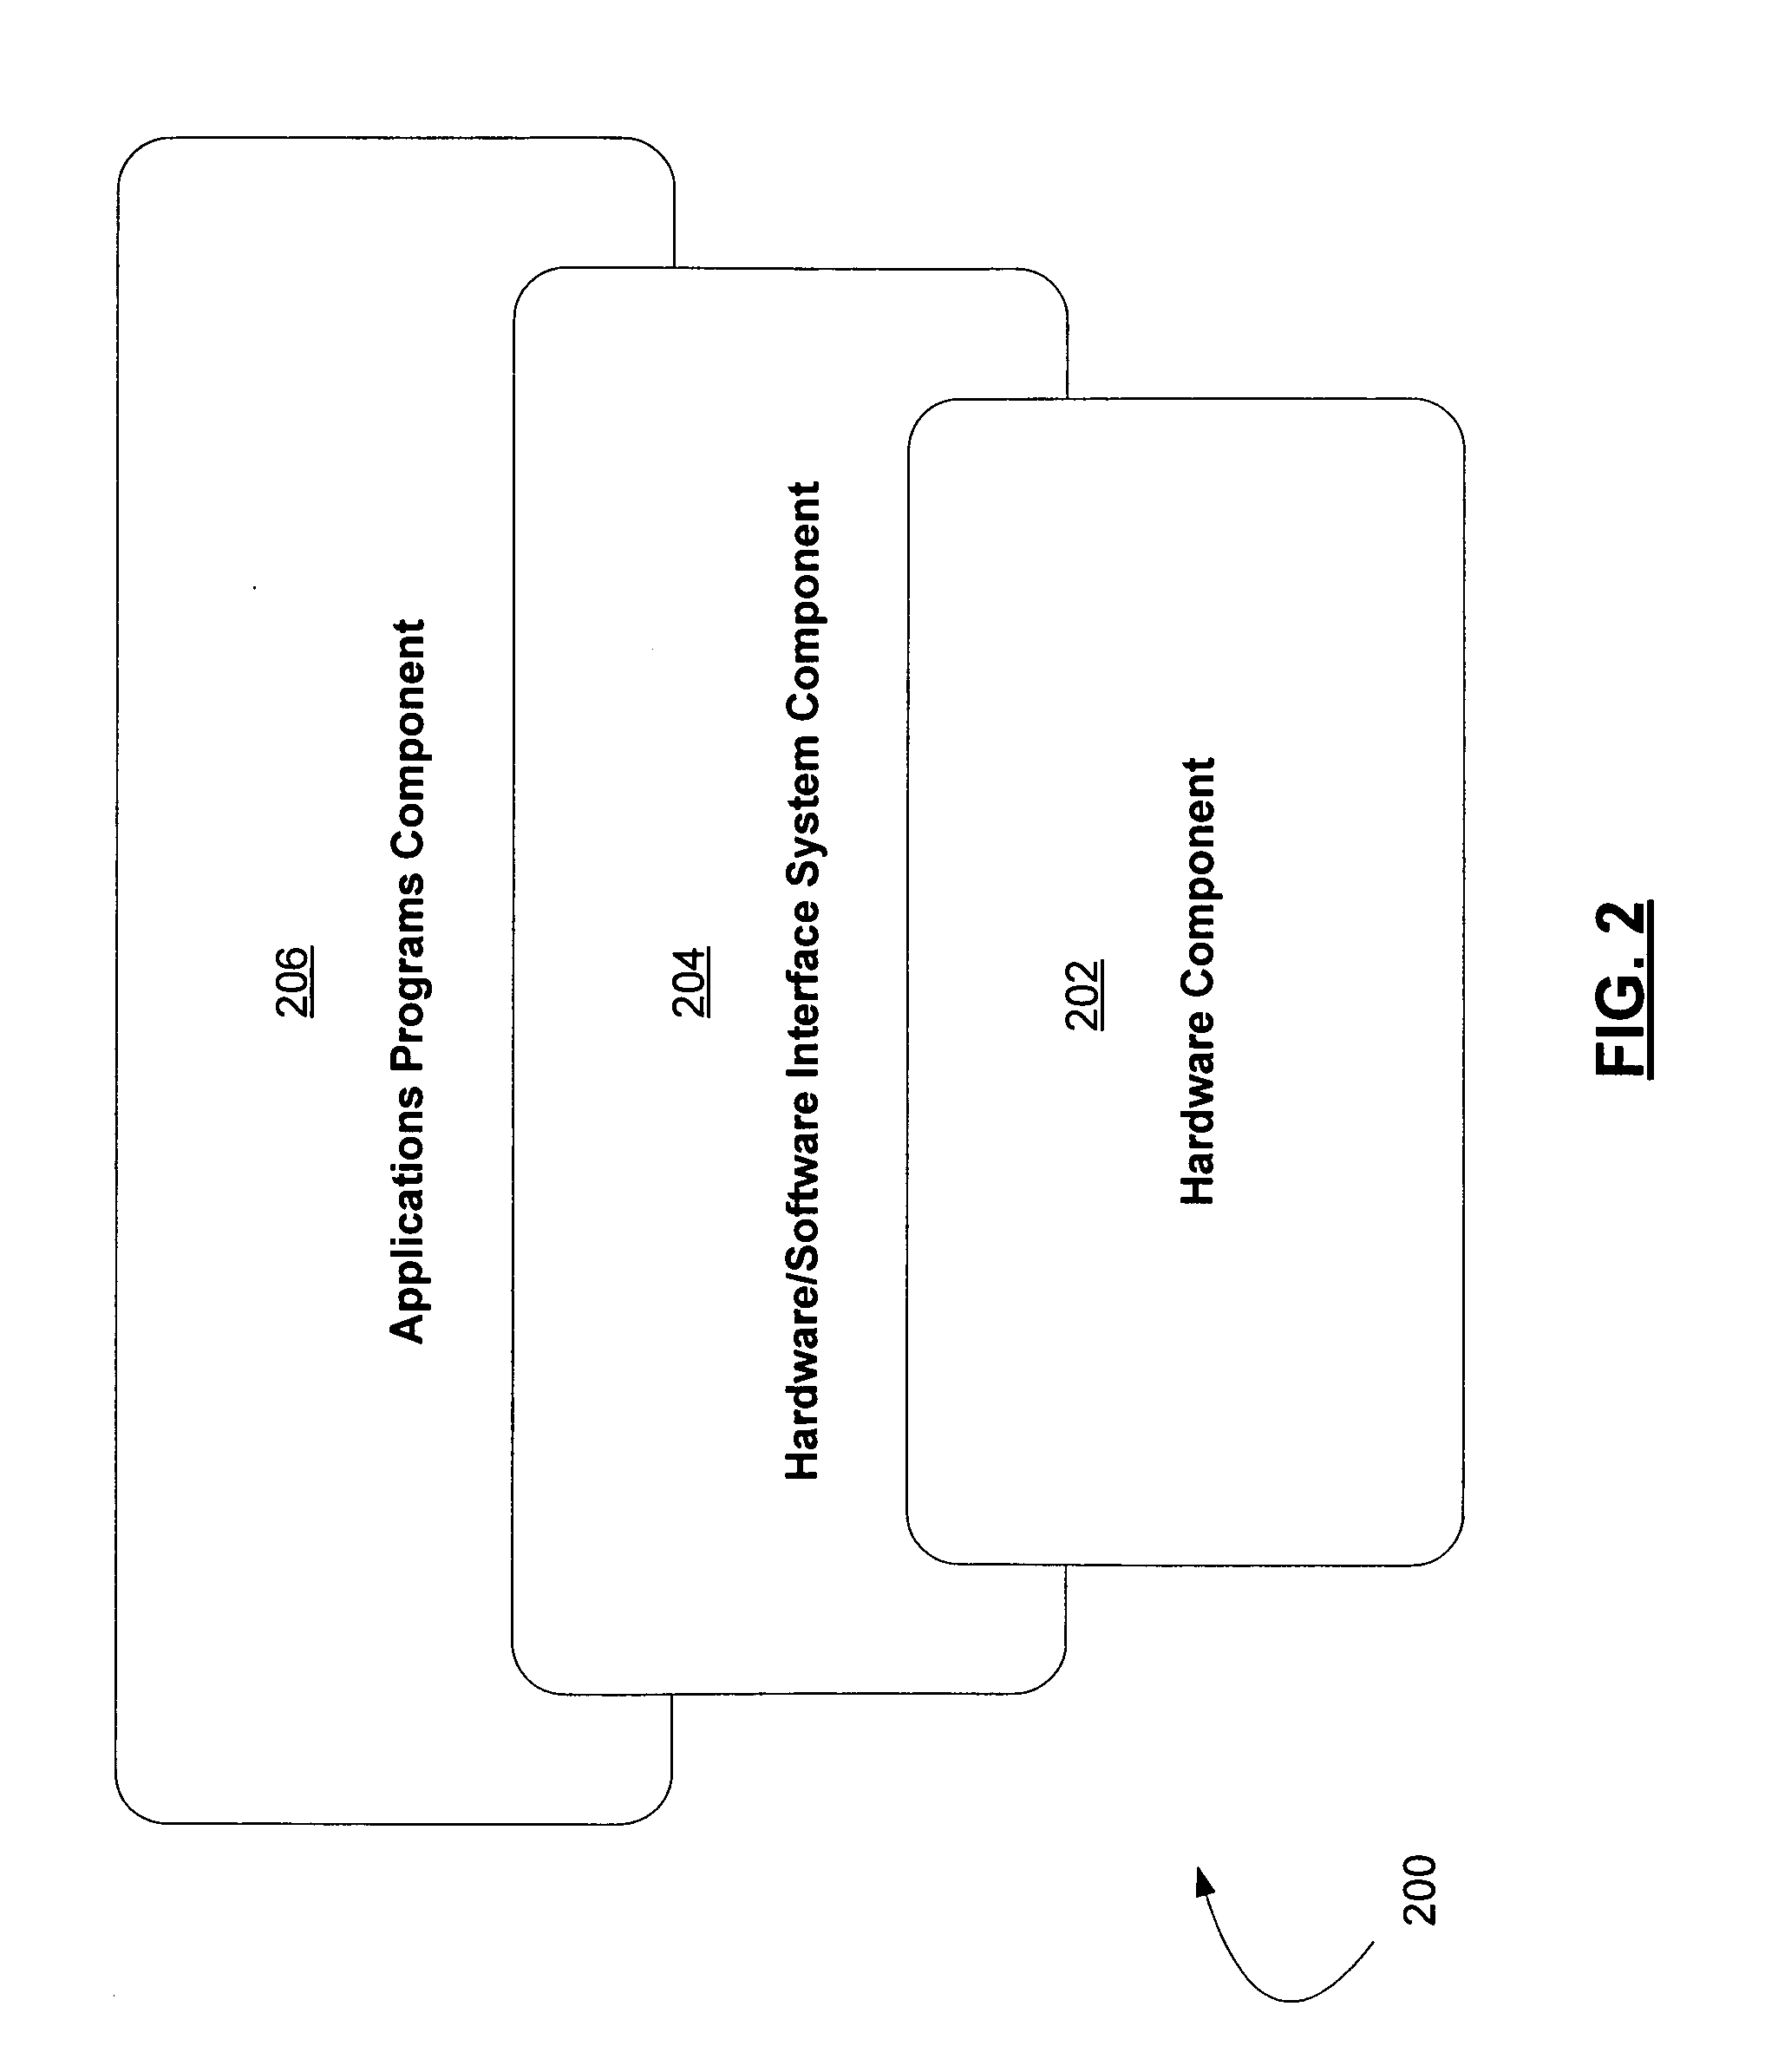 Systems and methods for extensions and inheritance for units of information manageable by a hardware/software interface system